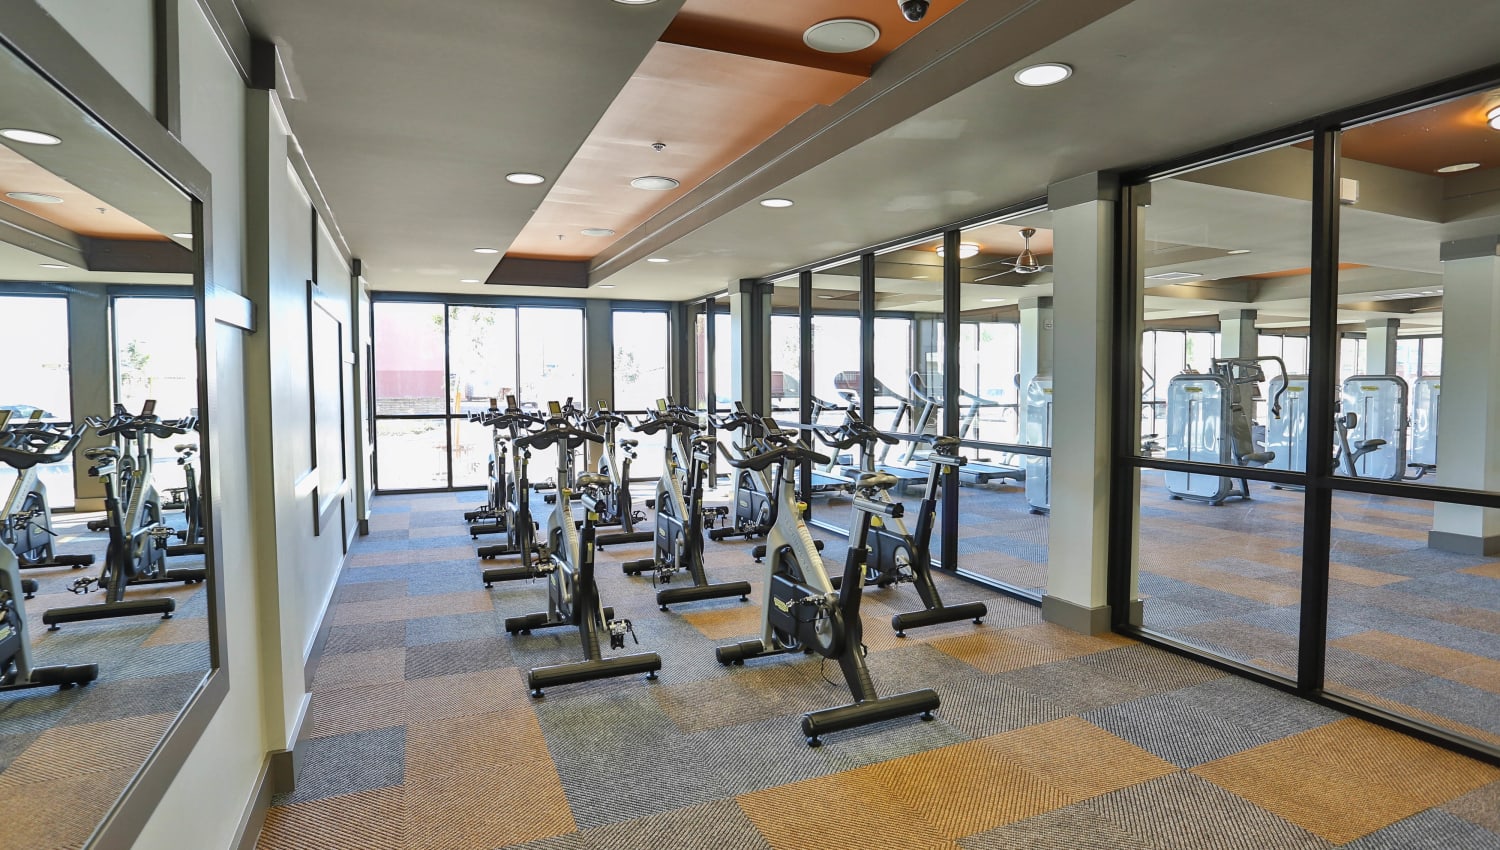 Spin bikes in the fitness center at Olympus Steelyard in Chandler, Arizona